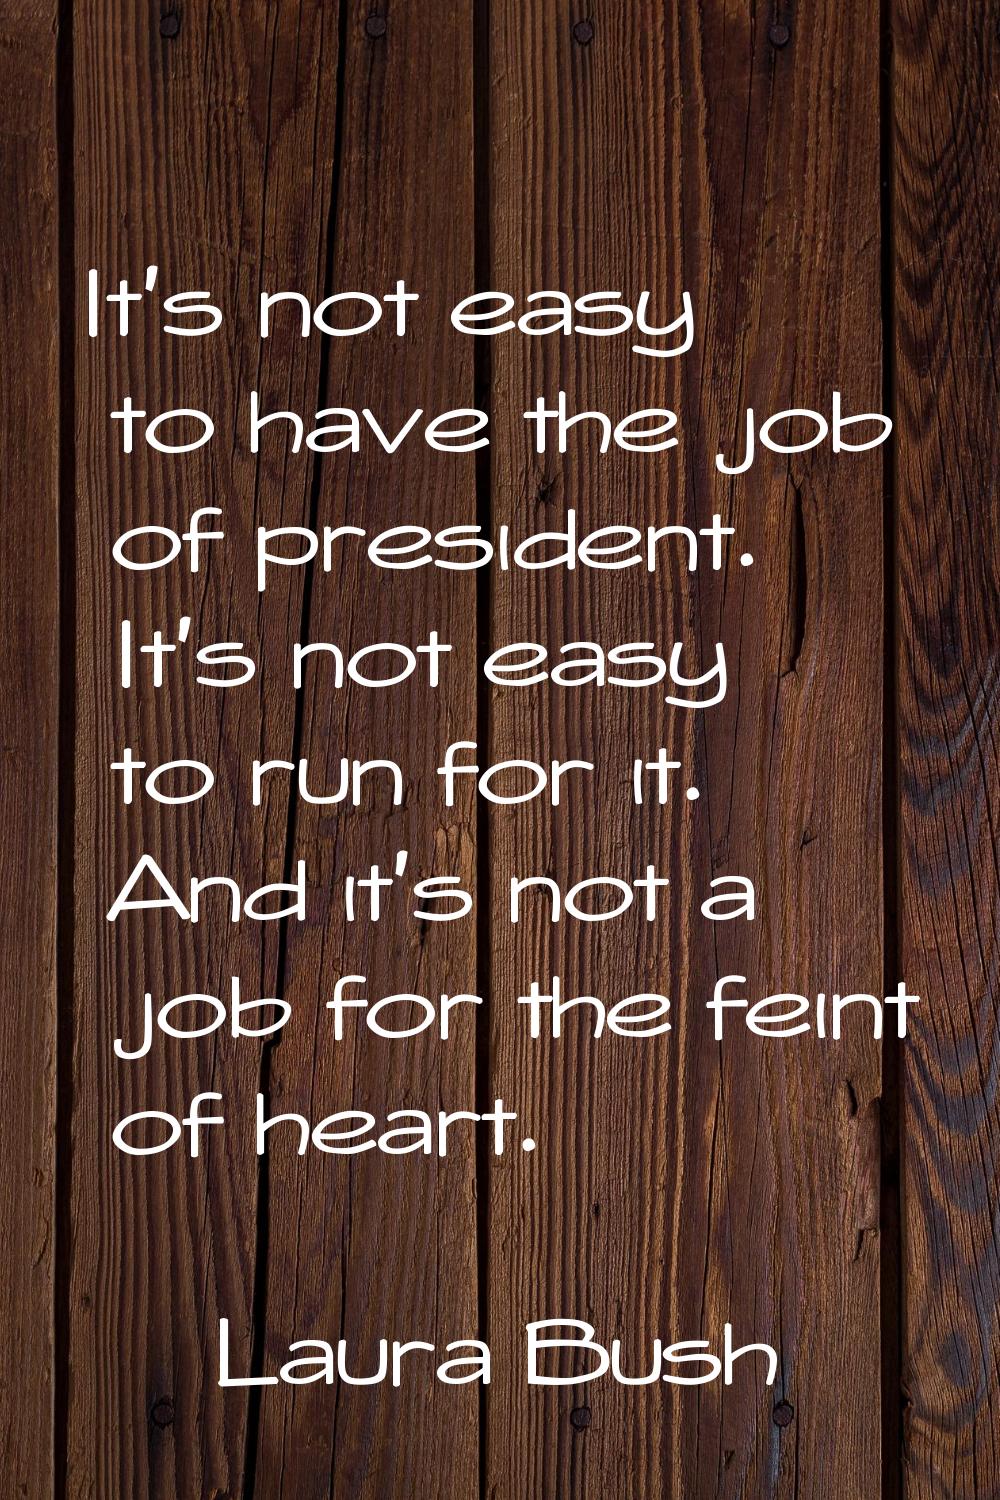 It's not easy to have the job of president. It's not easy to run for it. And it's not a job for the